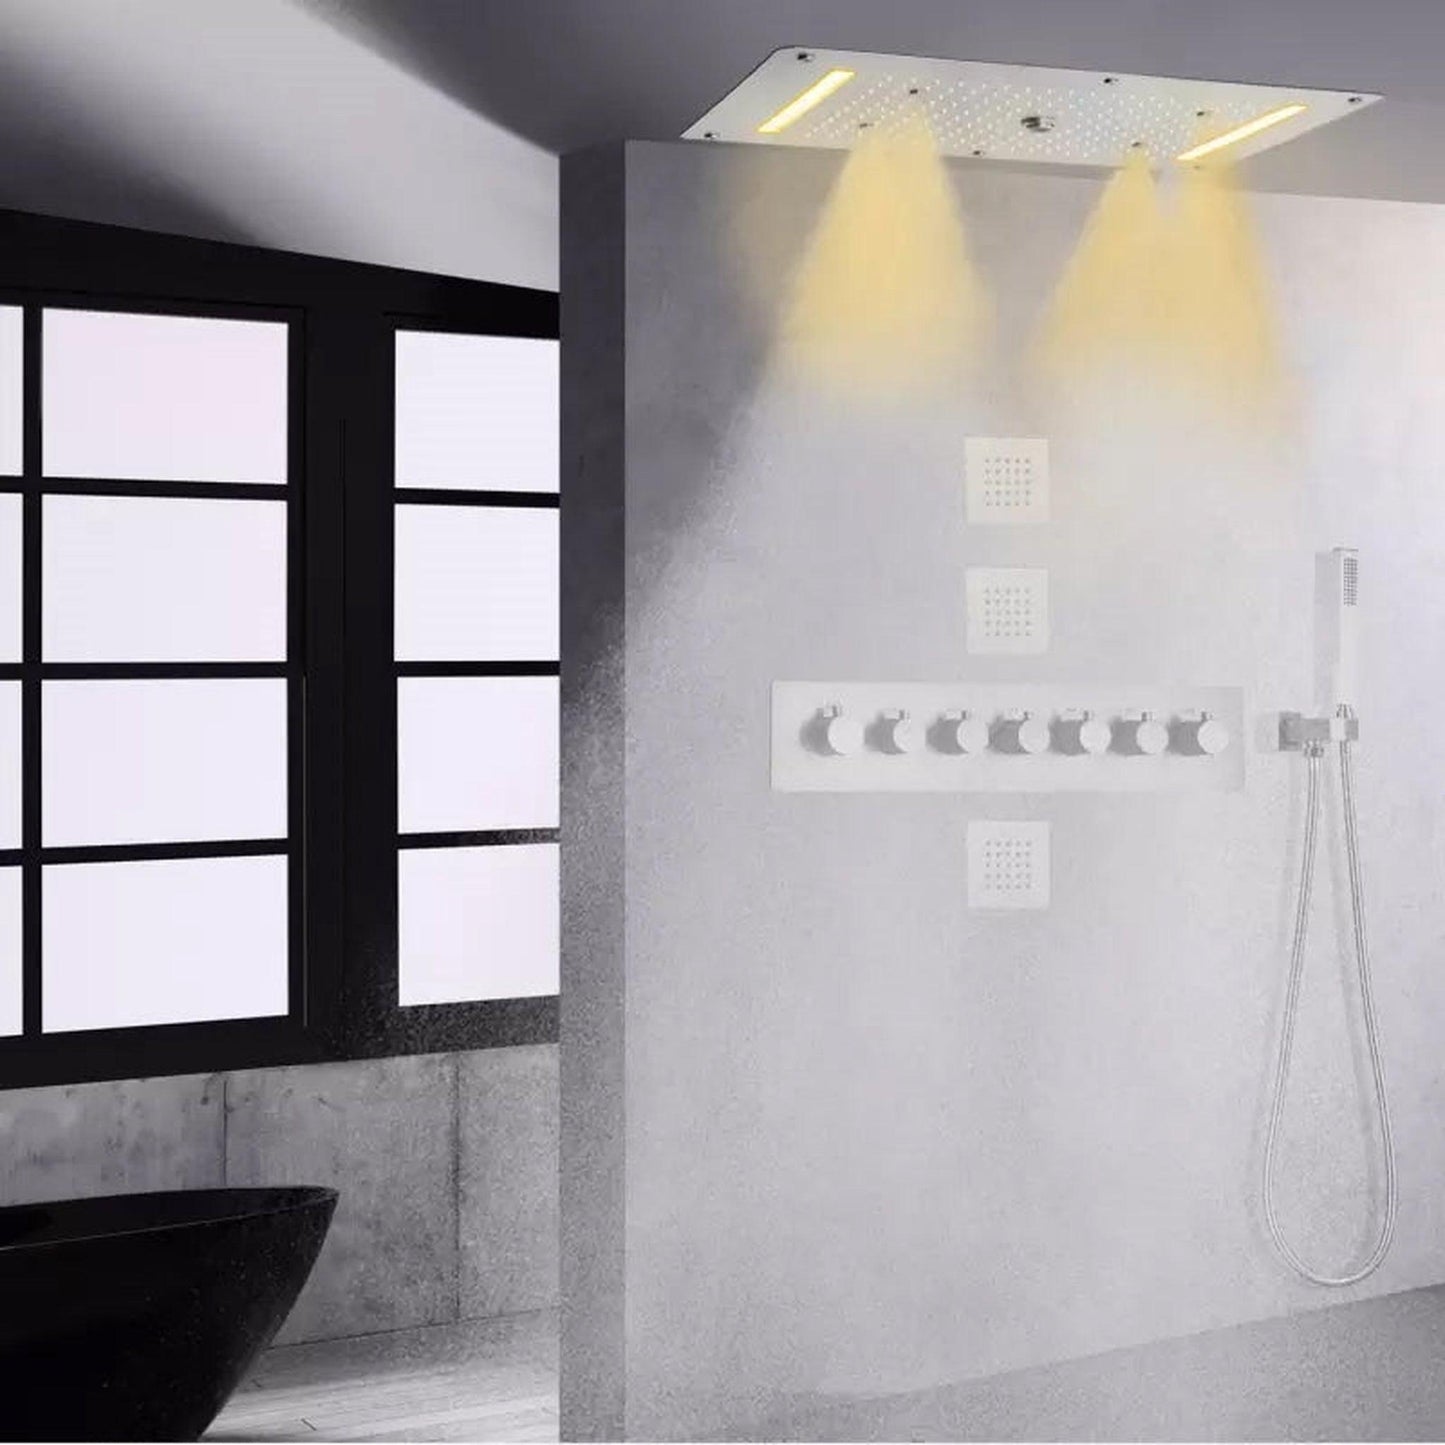 Fontana Cremona Brushed Nickel Recessed Ceiling Mounted Thermostatic LED Waterfall Rainfall Shower System With Hand Shower and 3-Jet Body Sprays